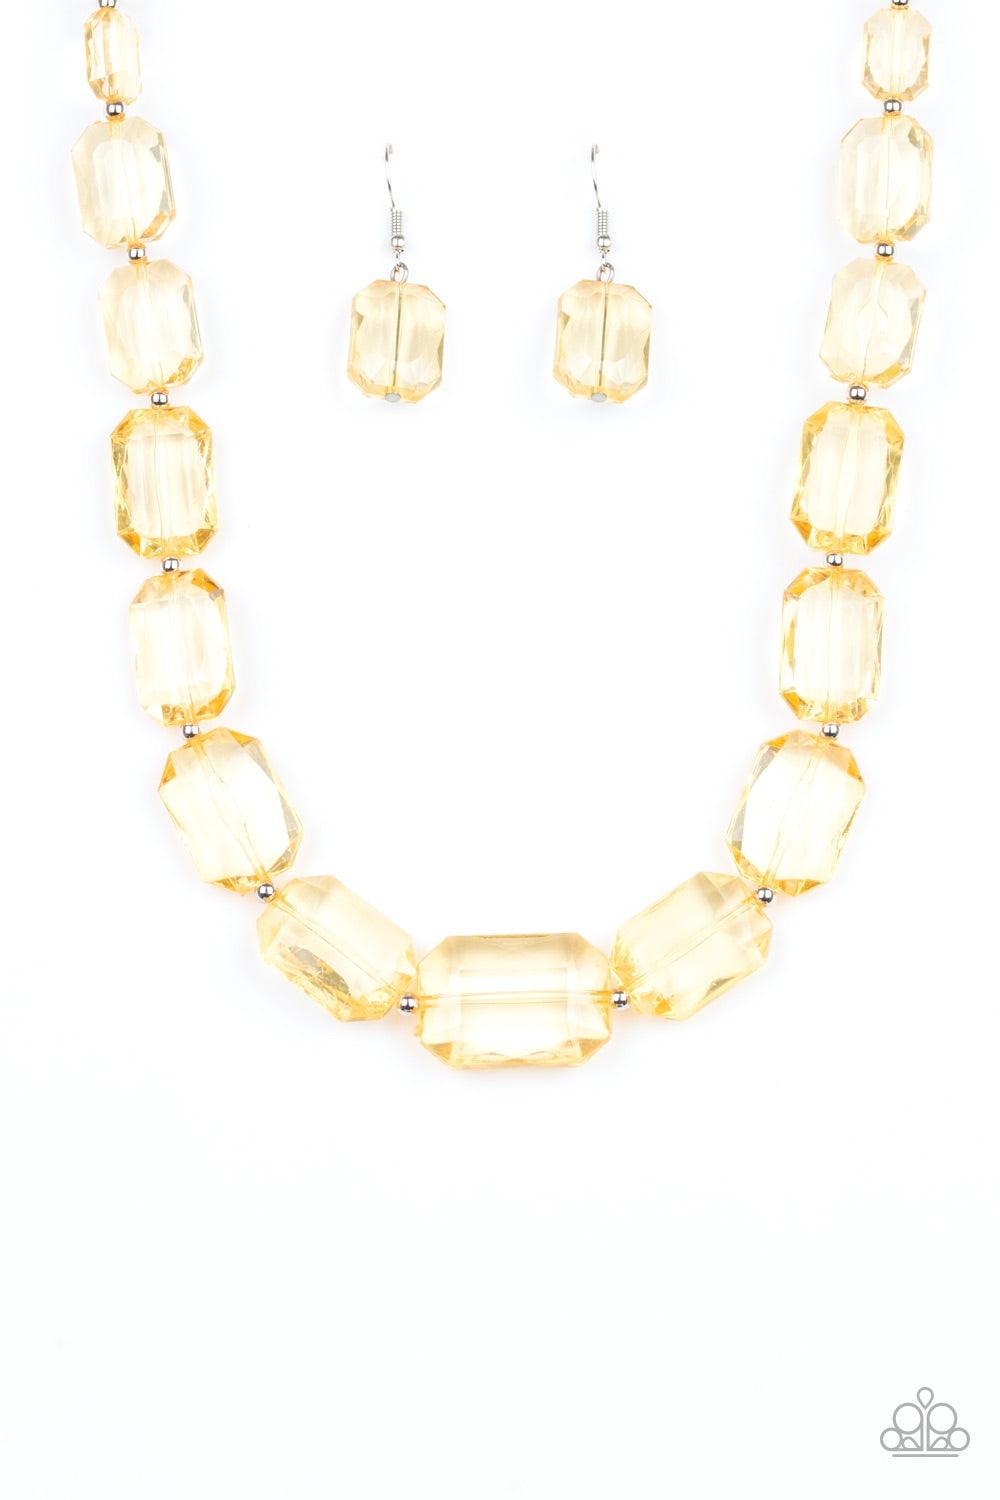 Paparazzi Accessories ICE Versa - Yellow Infused with dainty silver beads, glassy yellow emerald-cut beads gradually increase in size as they drape below the collar. Features an adjustable clasp closure. Jewelry